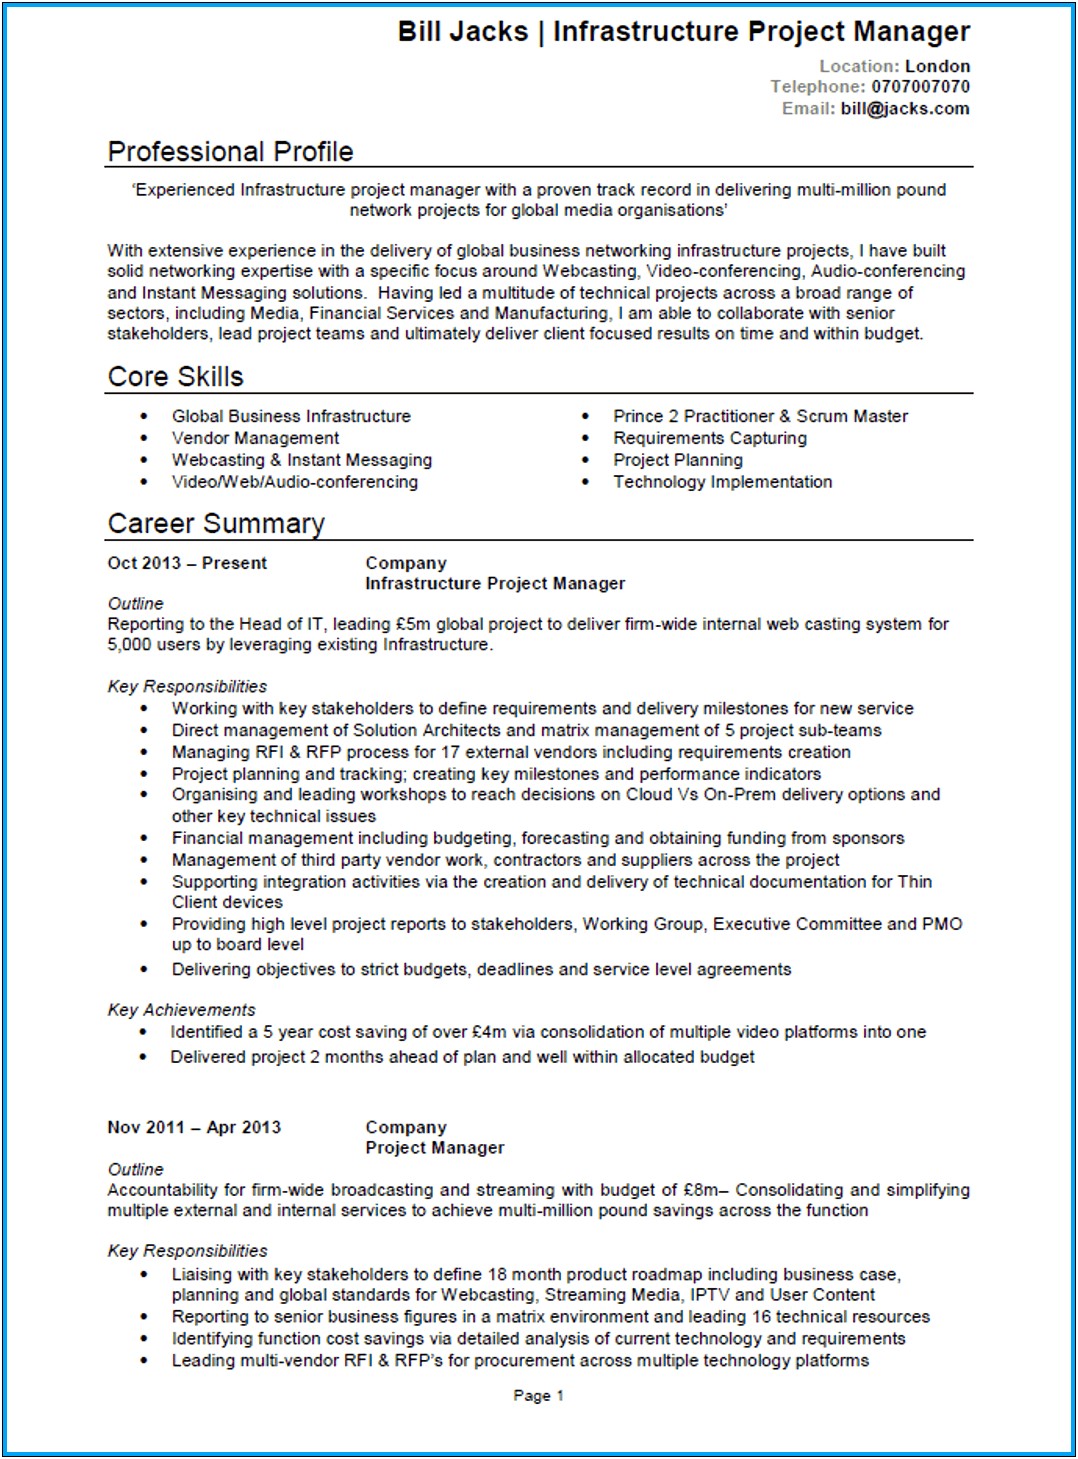 Non It Project Management Resume Sample